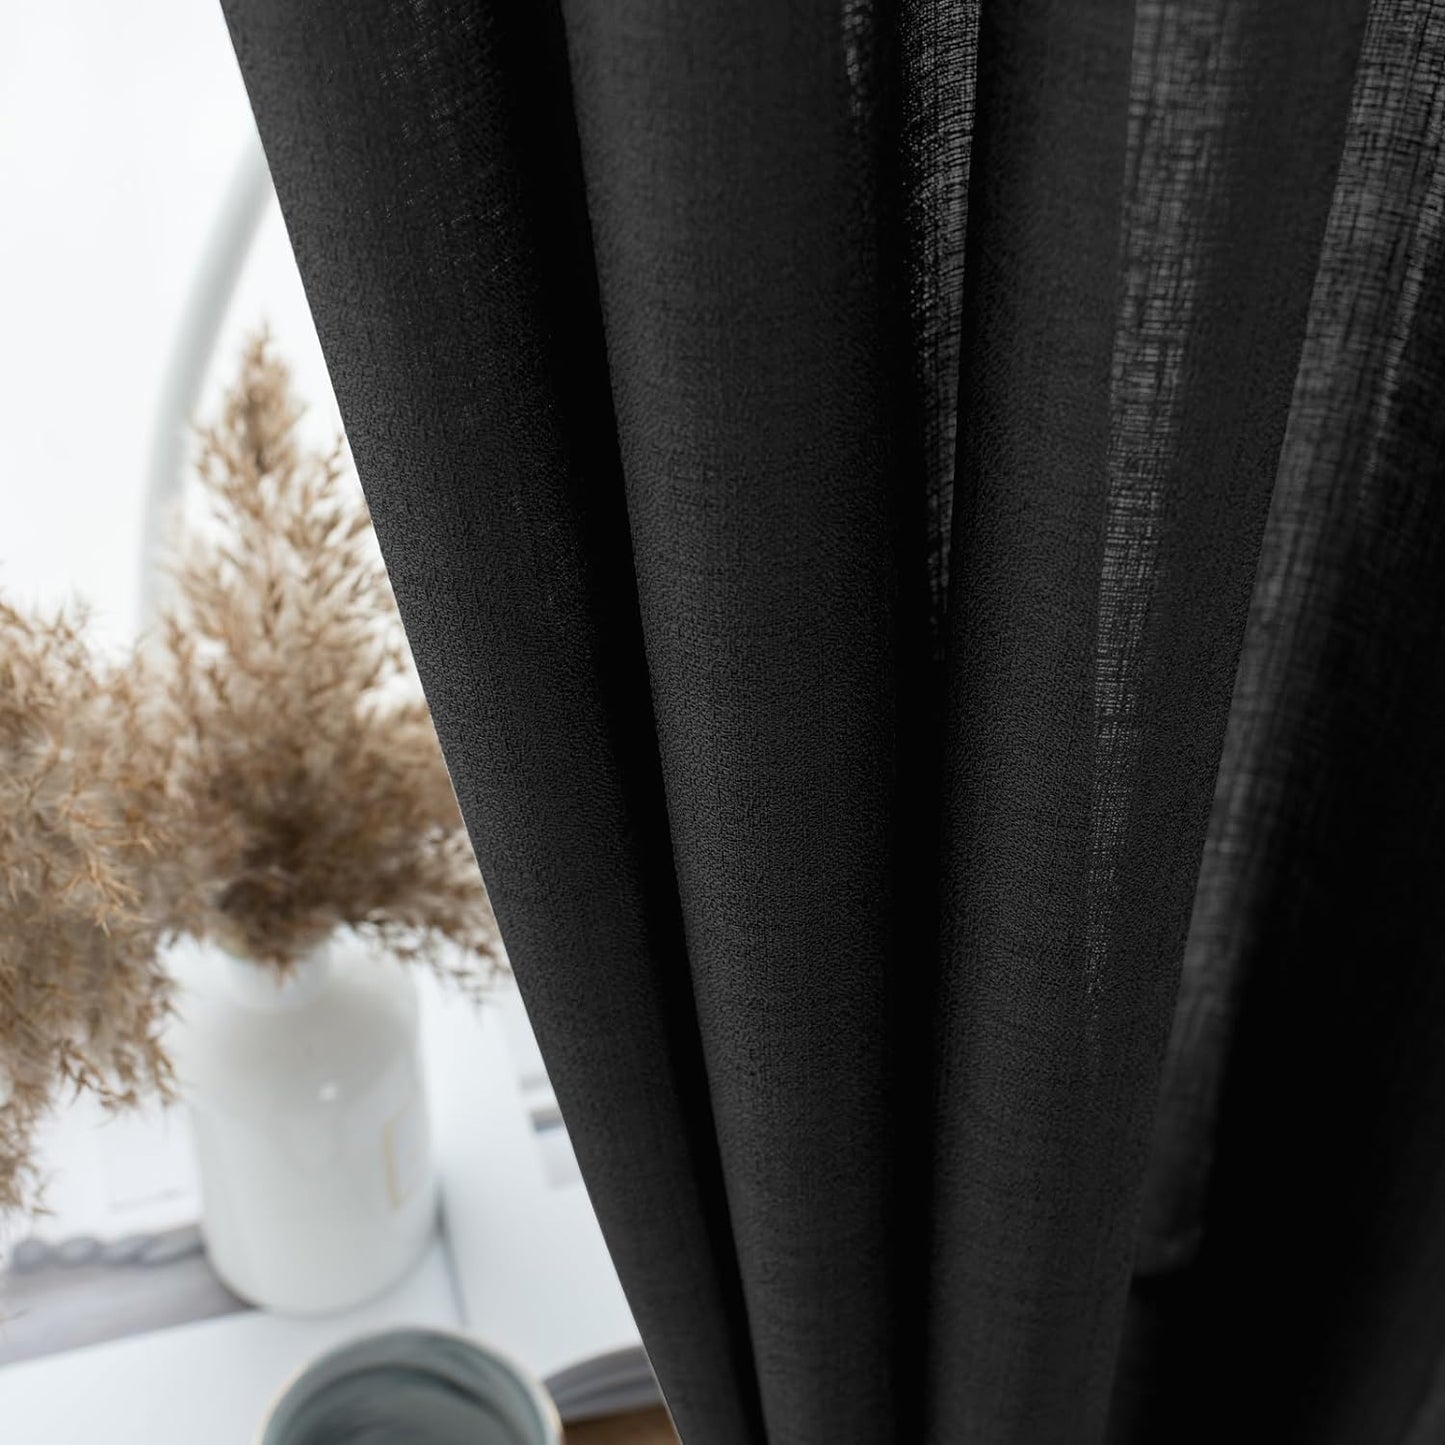 Anpark White Semi Sheer Curtains Linen Rod Pocket Curtains Tiebacks Included Semi Sheers, Privacy & Serenity for Bedroom, Soft Light for Relaxation - 52" W X 84" L, 2 Panels  Anpark Black 52X63 Inch 